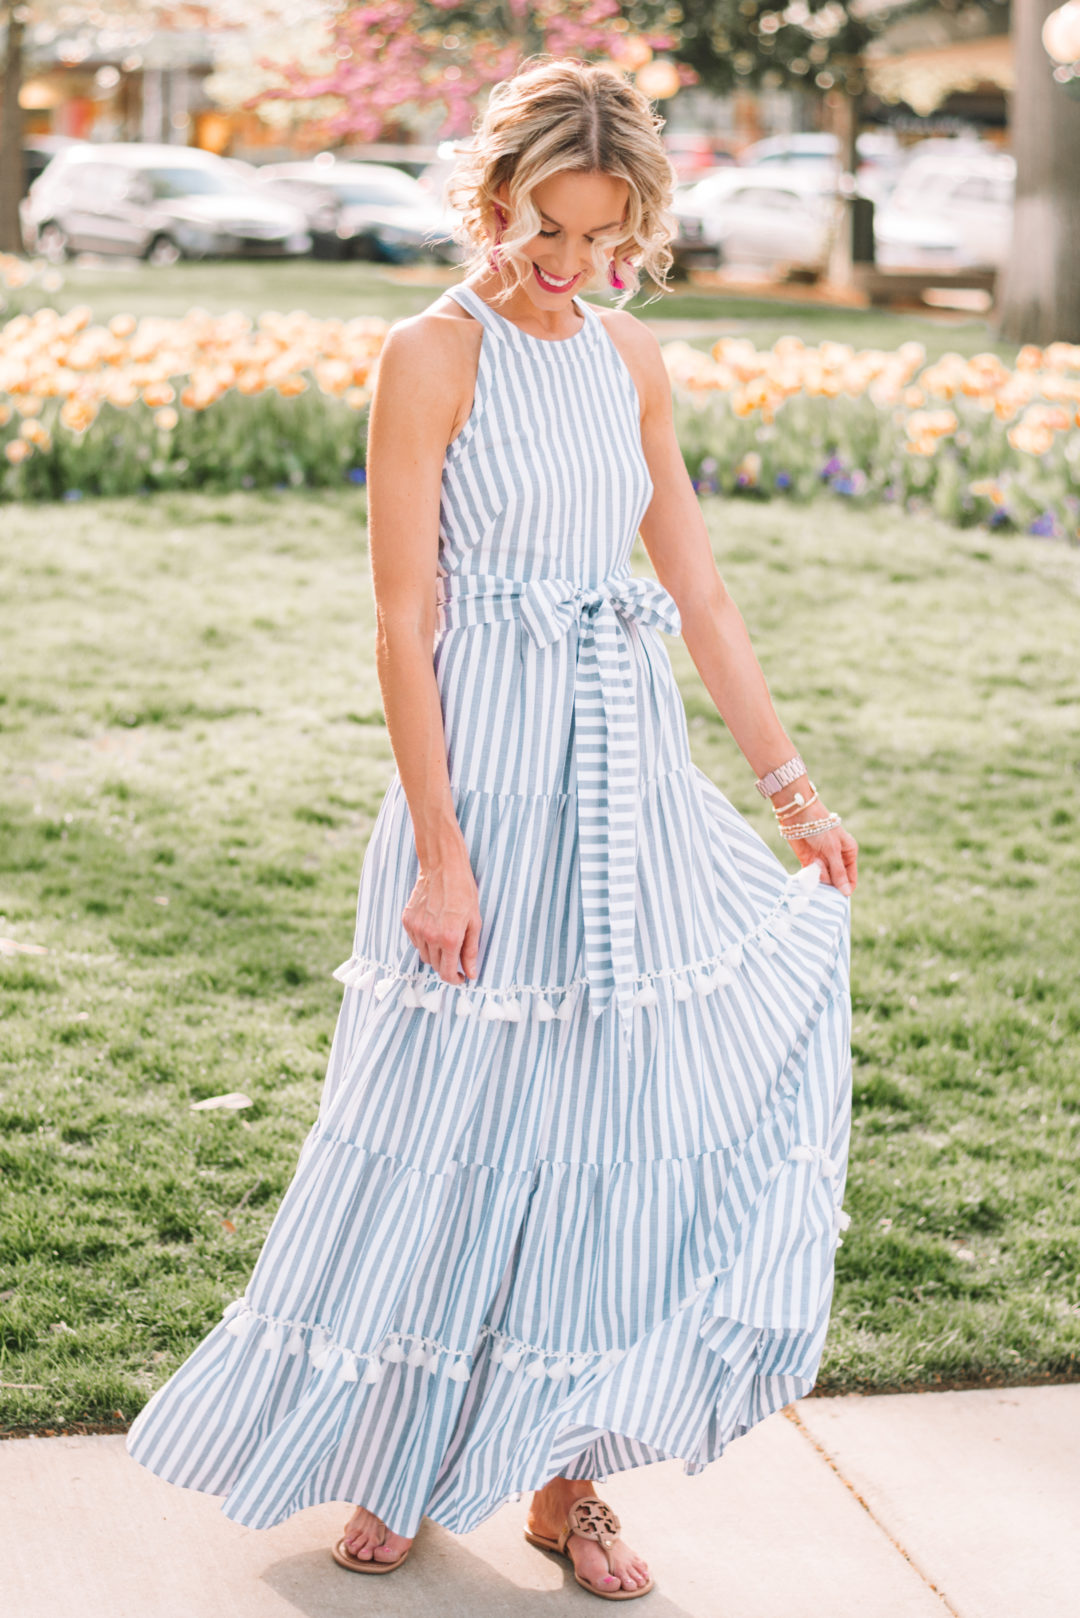 The Maxi Dress of My Dreams - Straight A Style